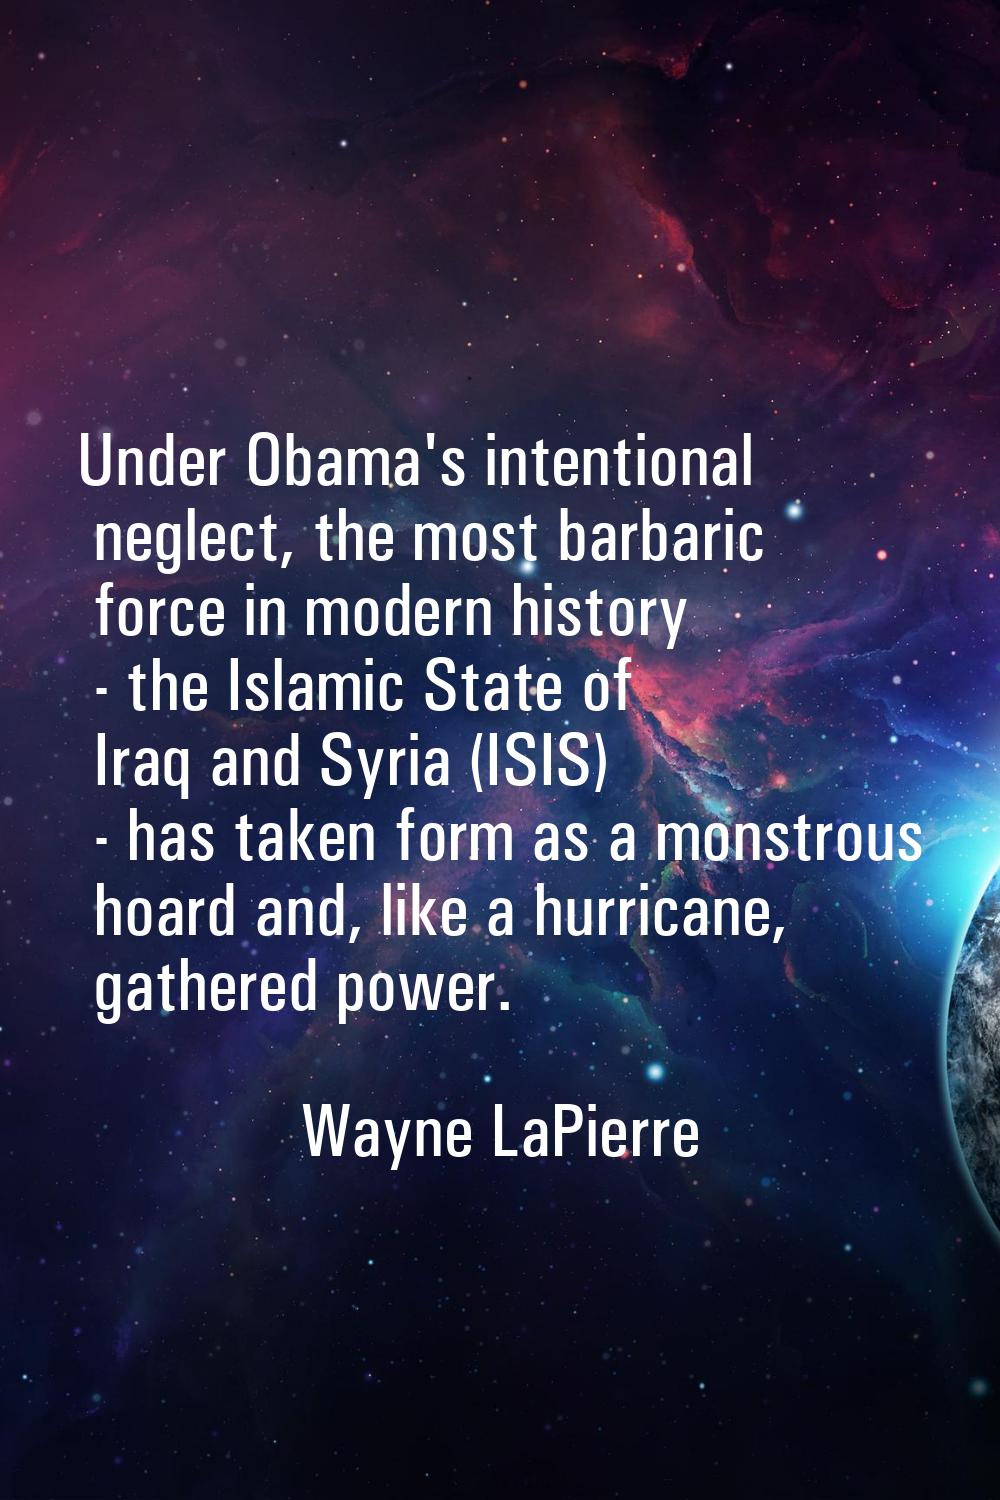 Under Obama's intentional neglect, the most barbaric force in modern history - the Islamic State of